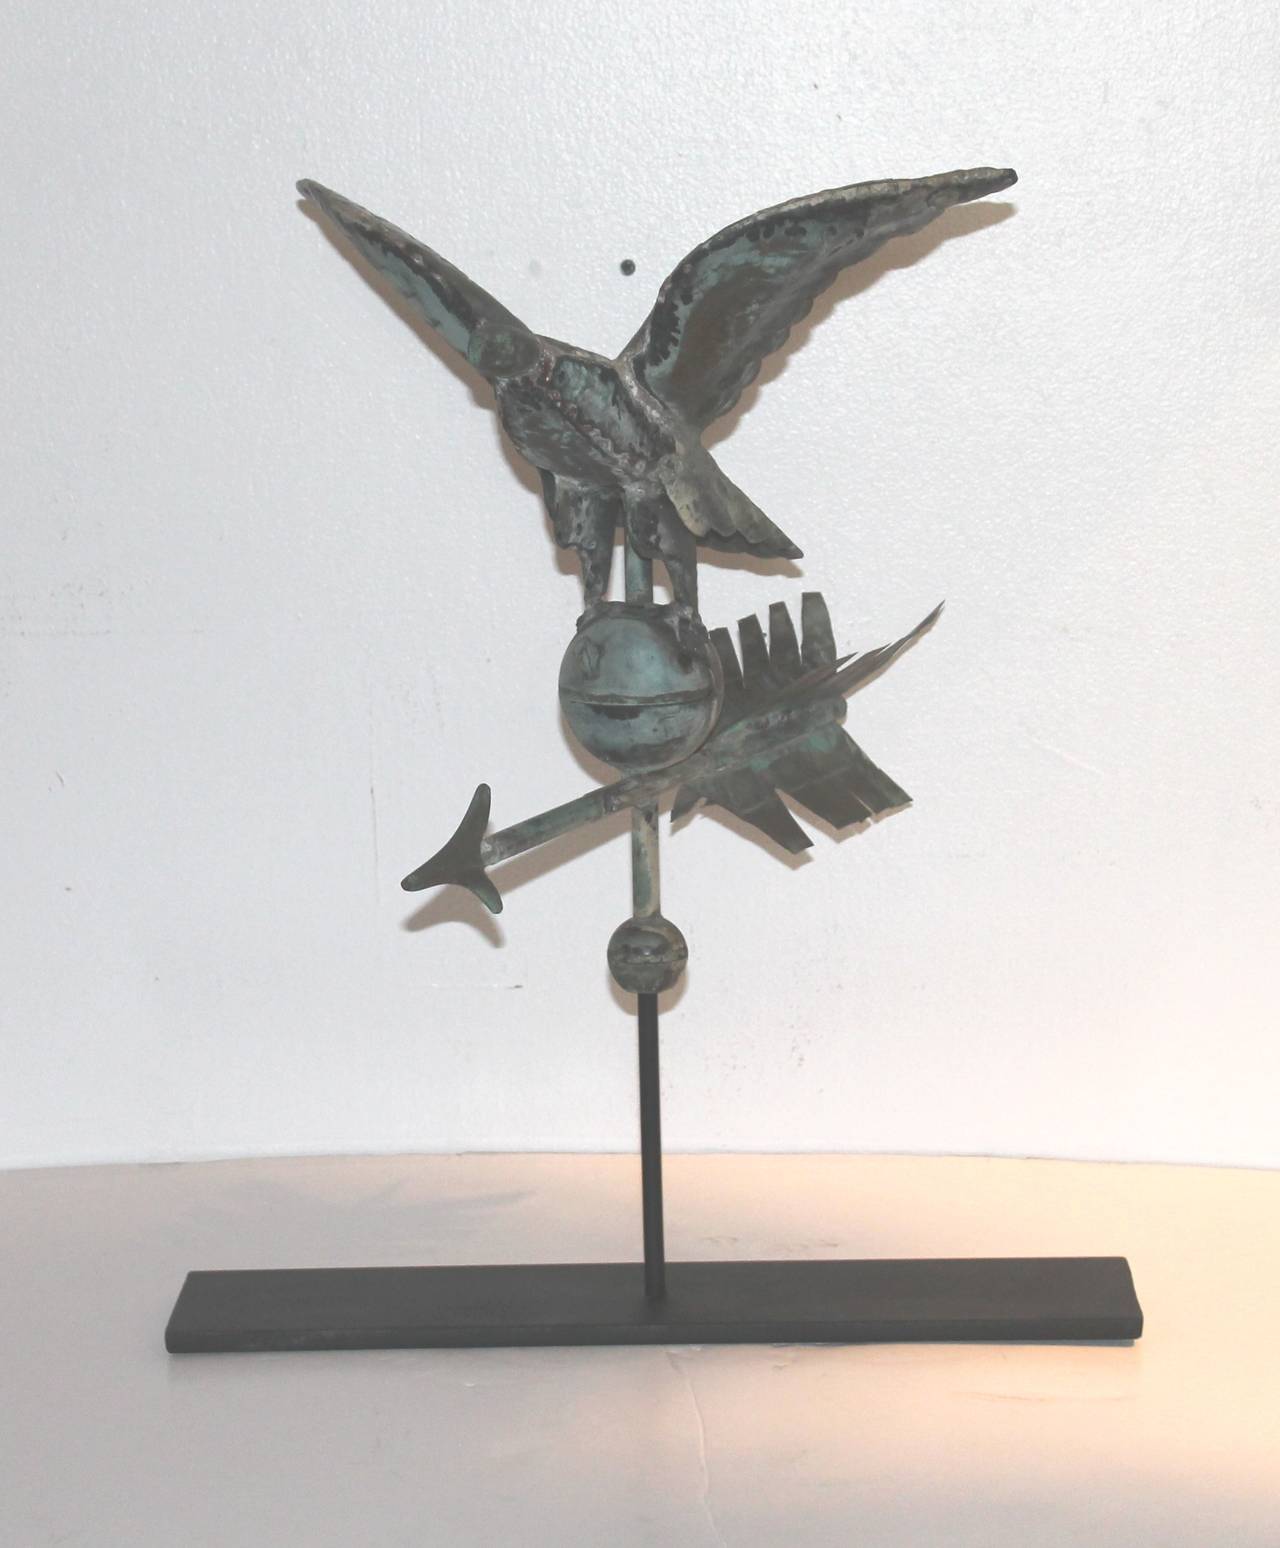 This amazing small-scale rare 19th century eagle weather vane sits on top of the unusual arrow in a verdigris copper patina. The nose is in zinc and so is the tip of the arrow. This vane sits on a custom-made iron stand. Great addition to any Folk